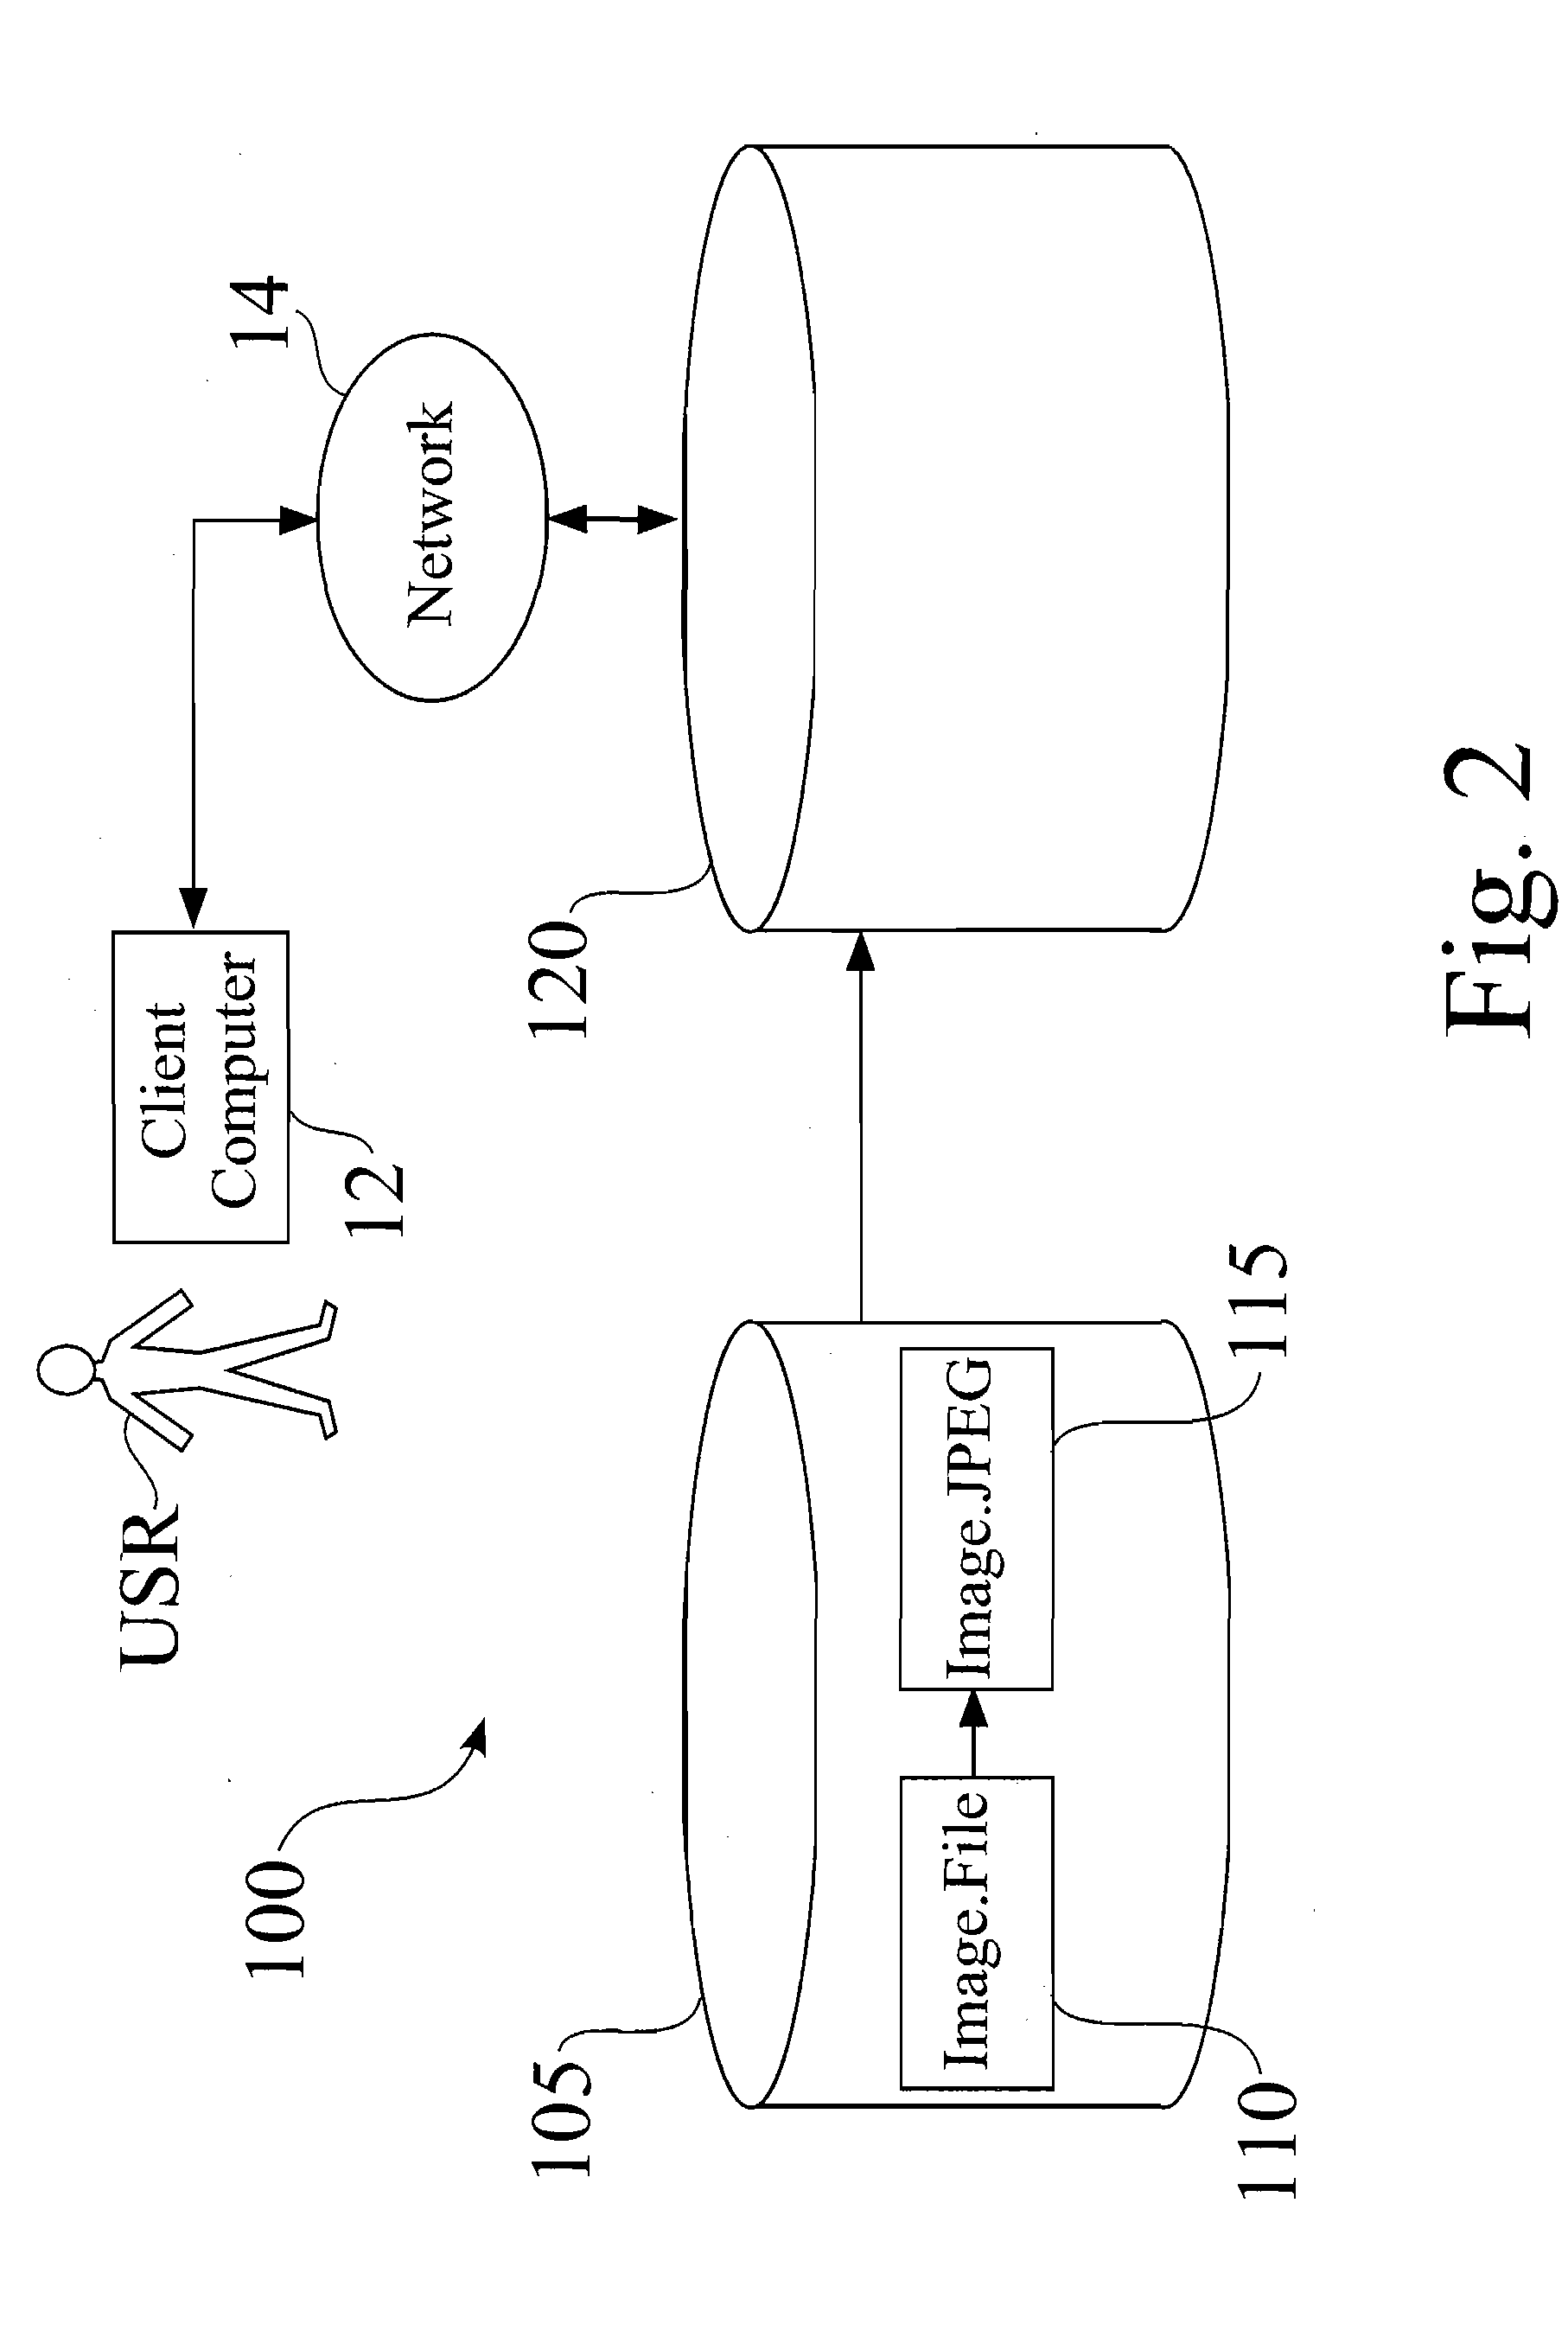 System for management of source and derivative data